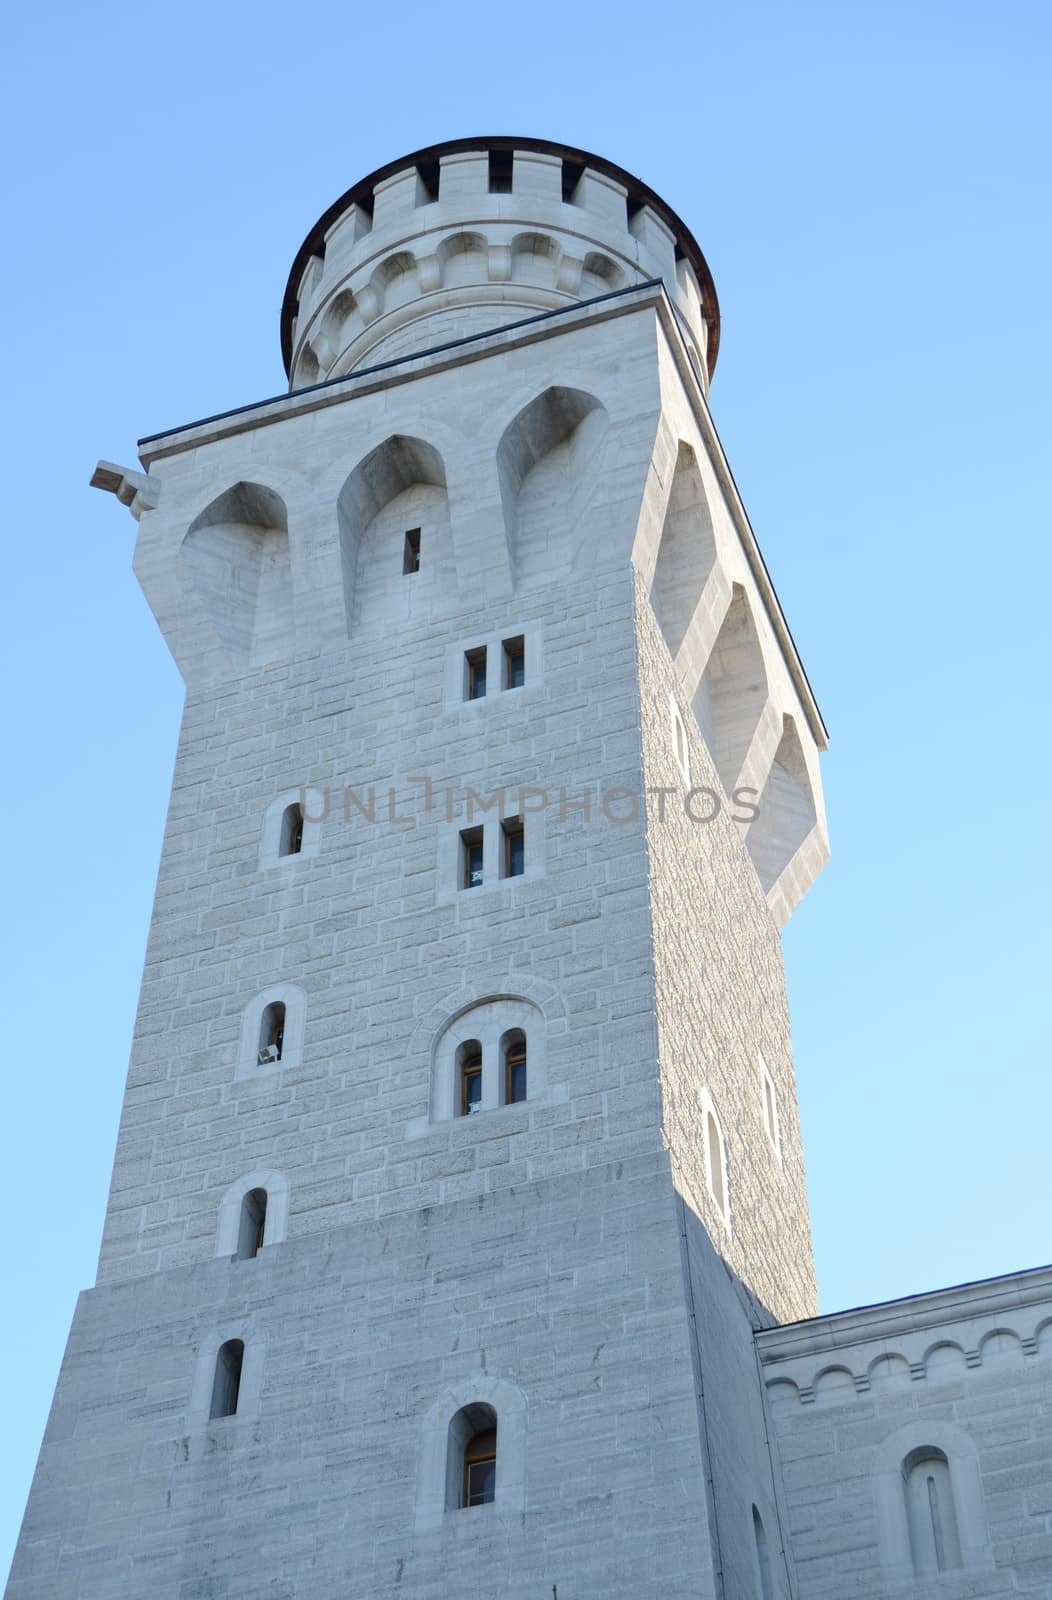 Architecture Detail Of A Tower Of A Castle Against A Blue Sky